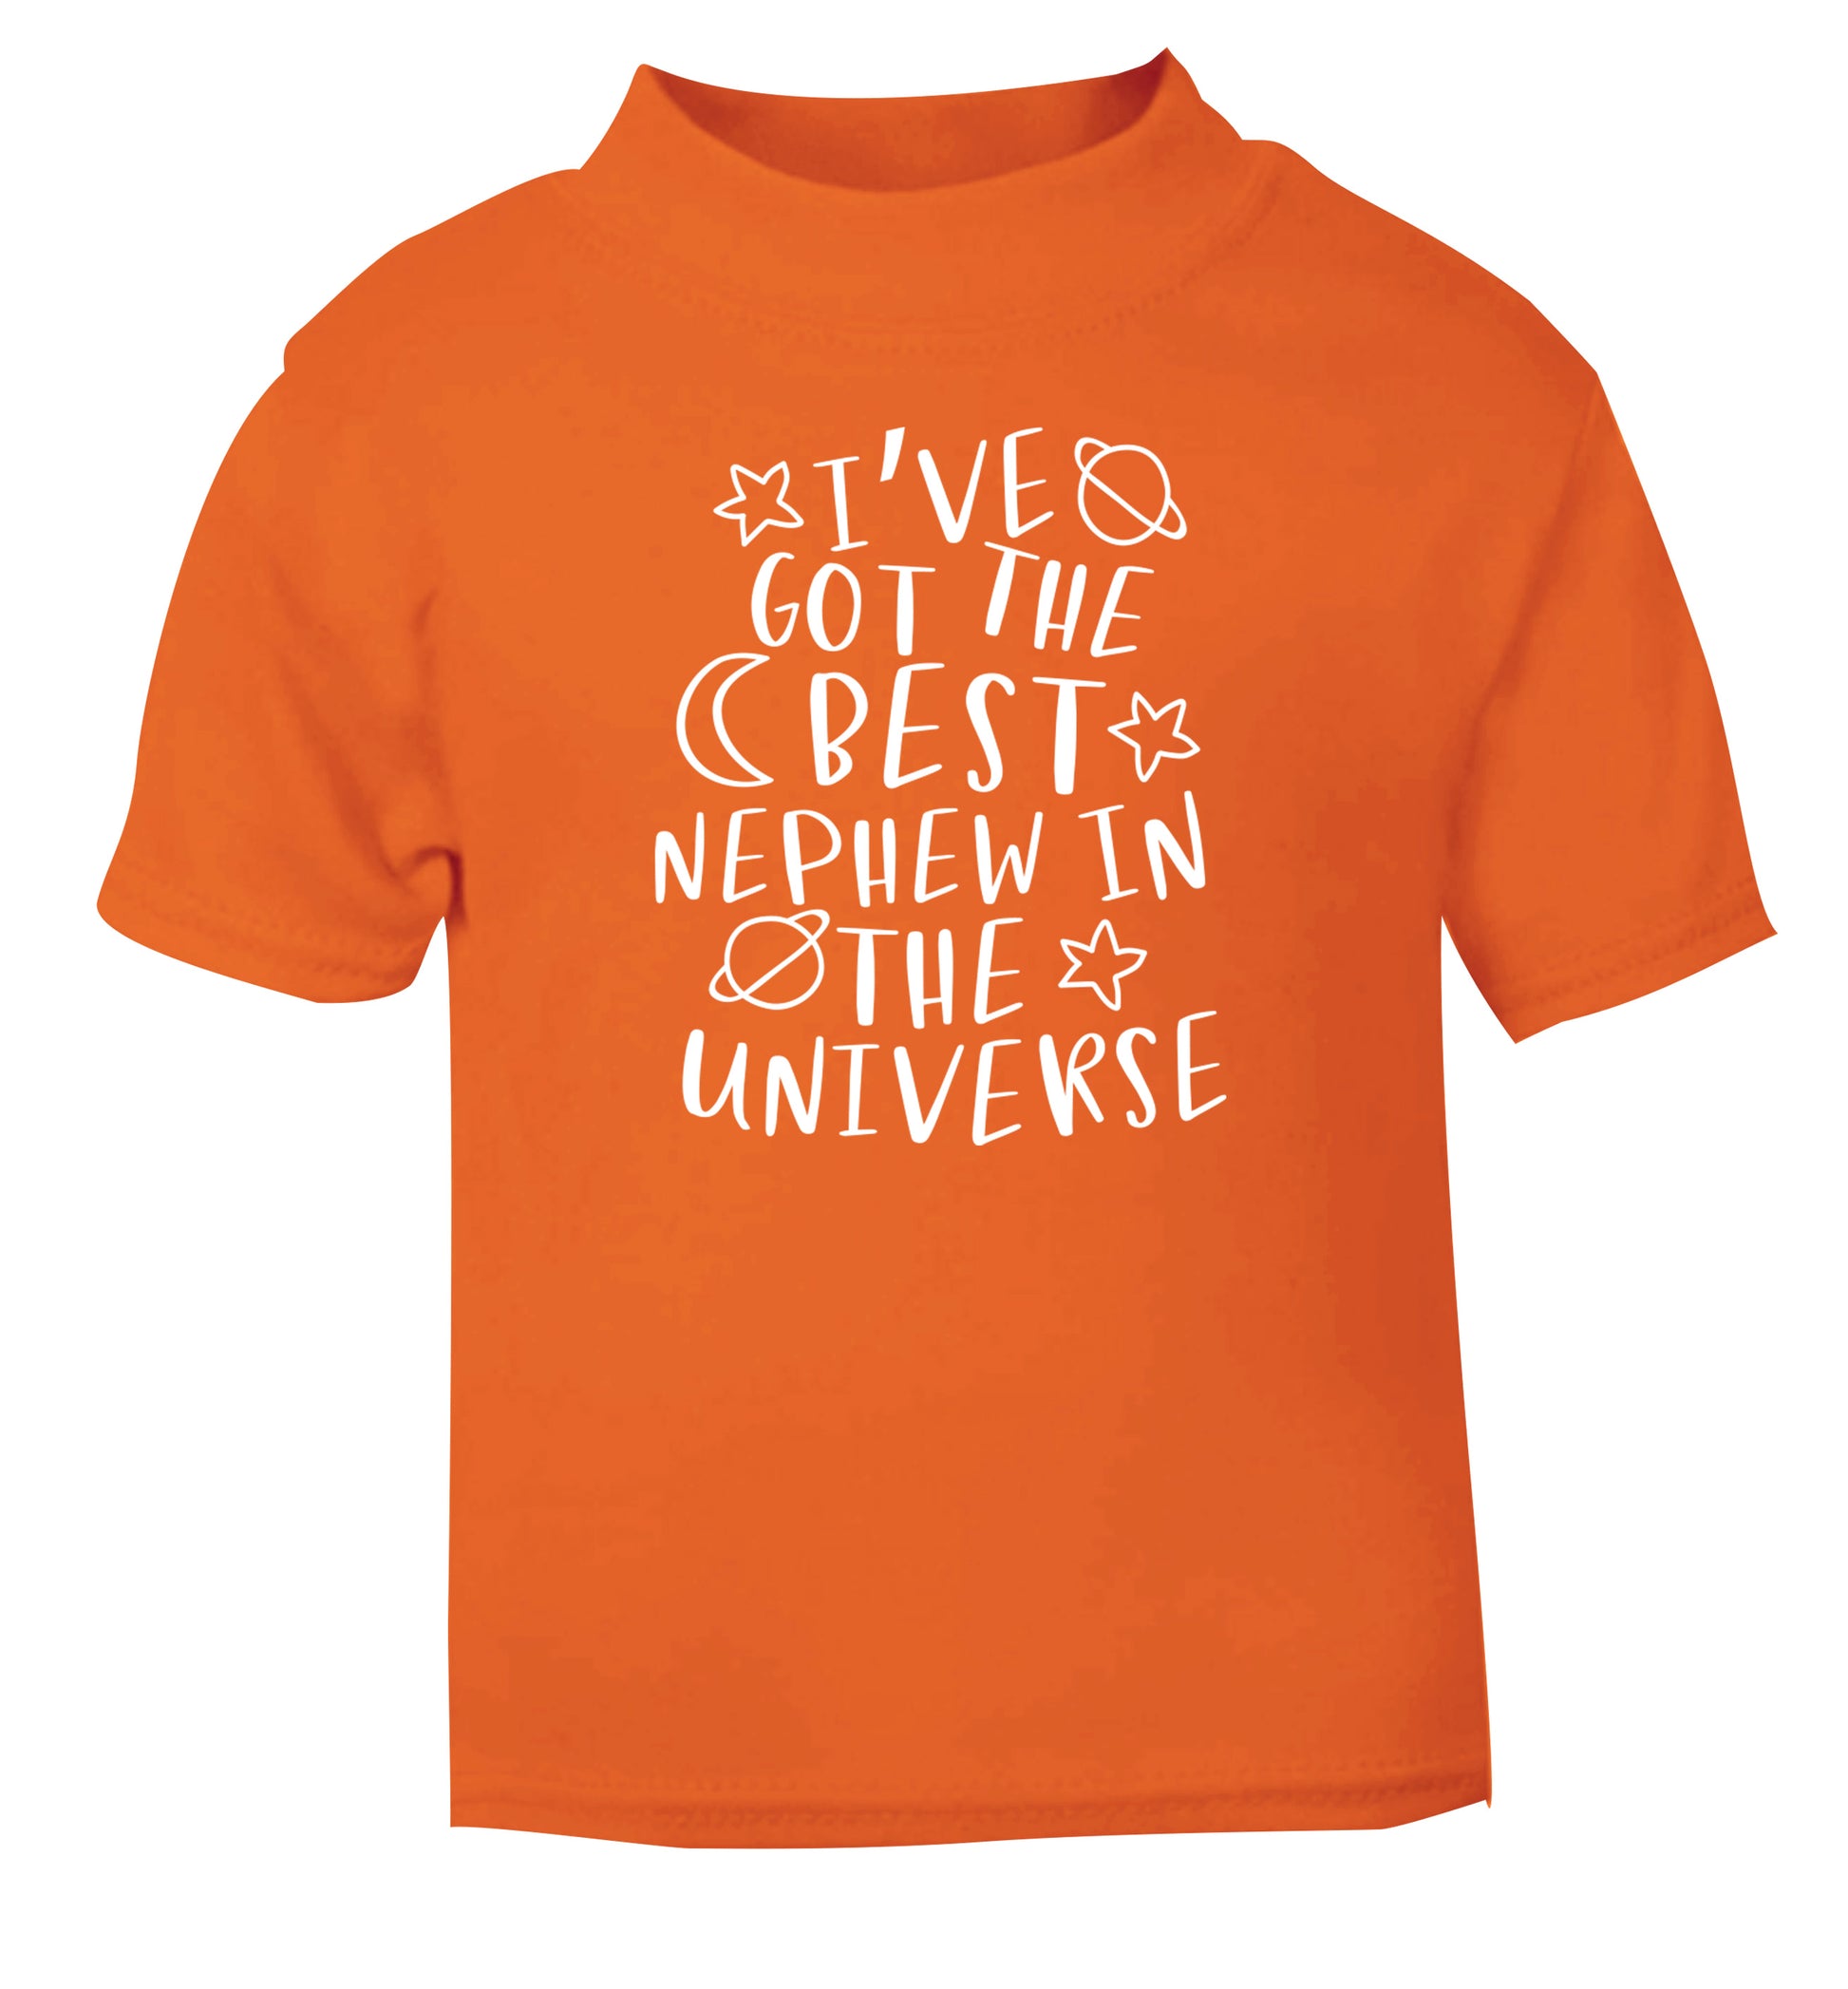 I've got the best nephew in the universe orange Baby Toddler Tshirt 2 Years